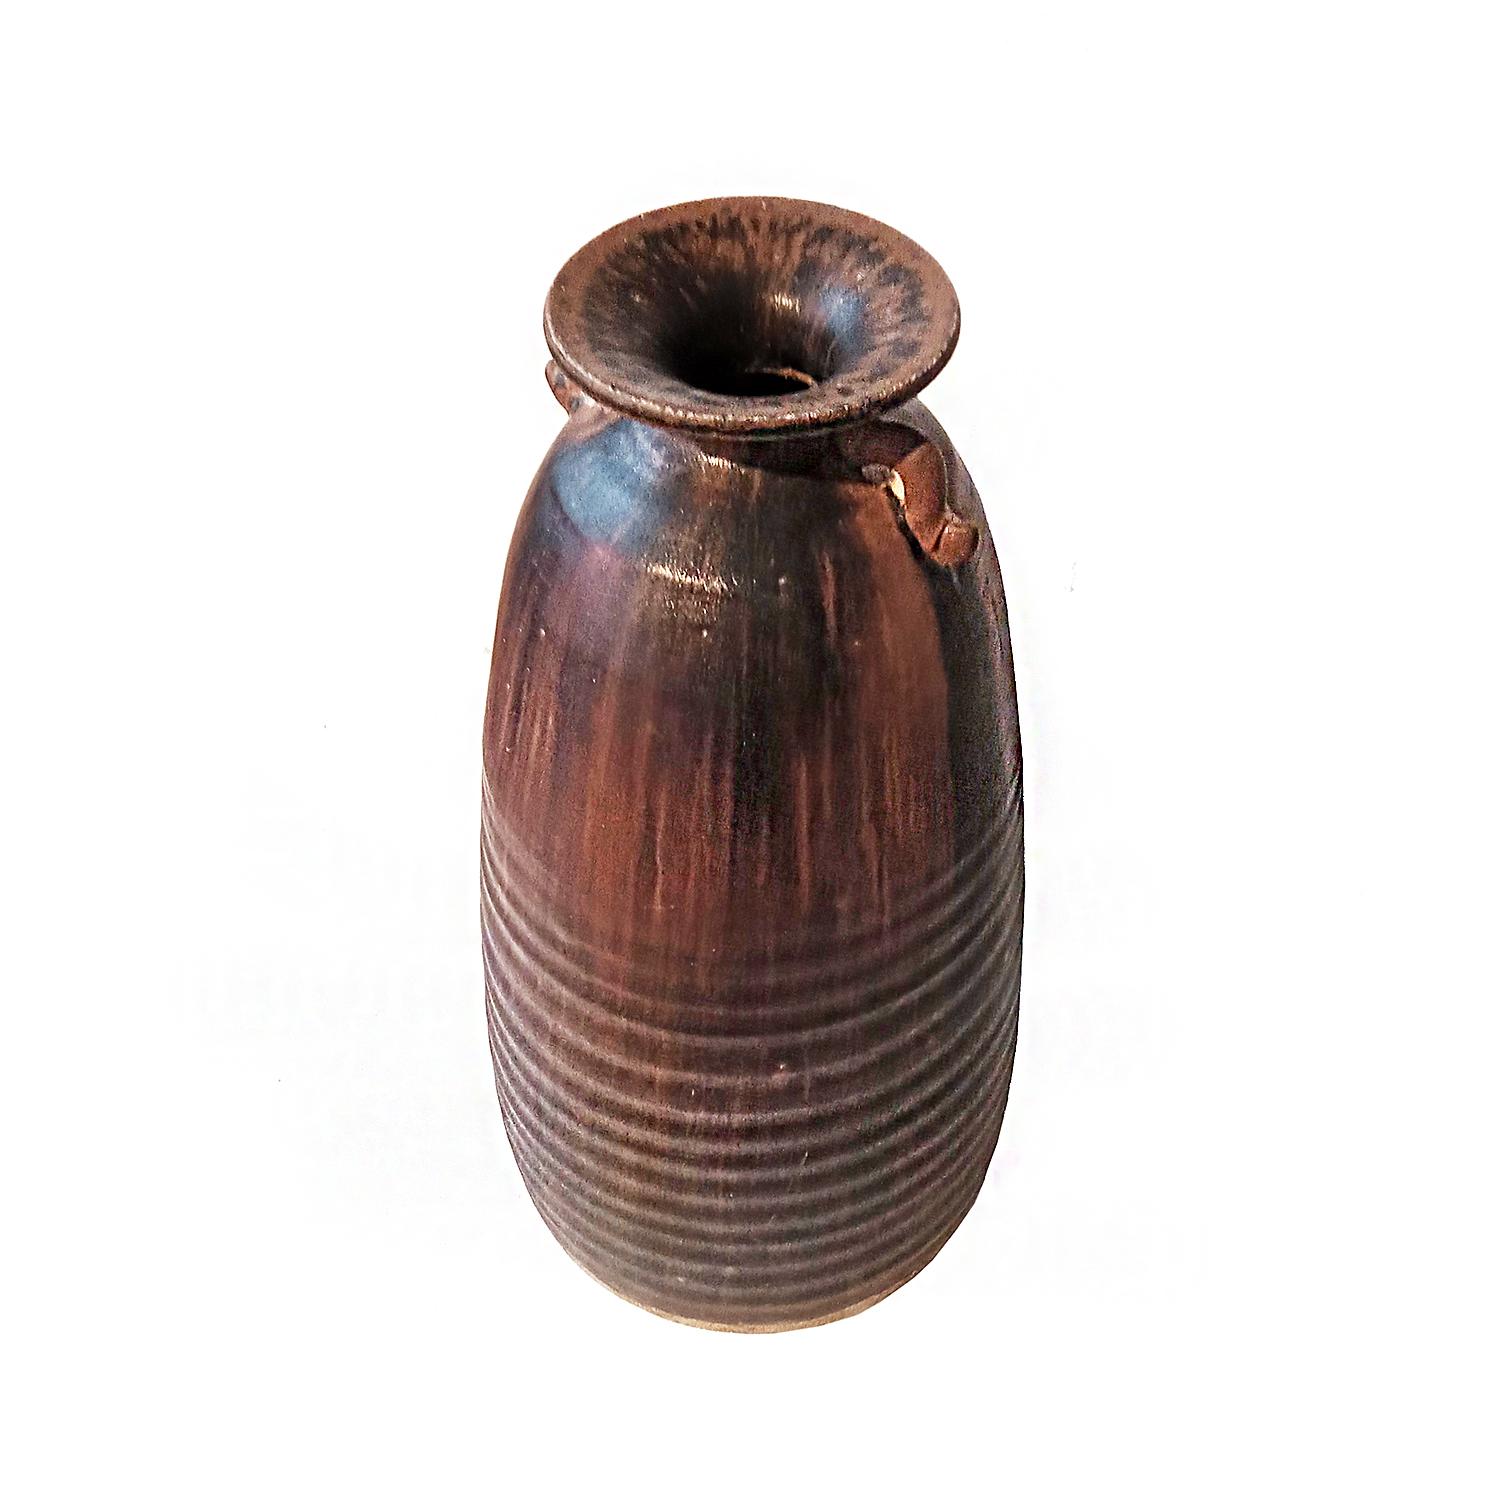 Glazed Tall Ceramic Thai Vase in Brown Mottled Glaze, with Looped Handles For Sale